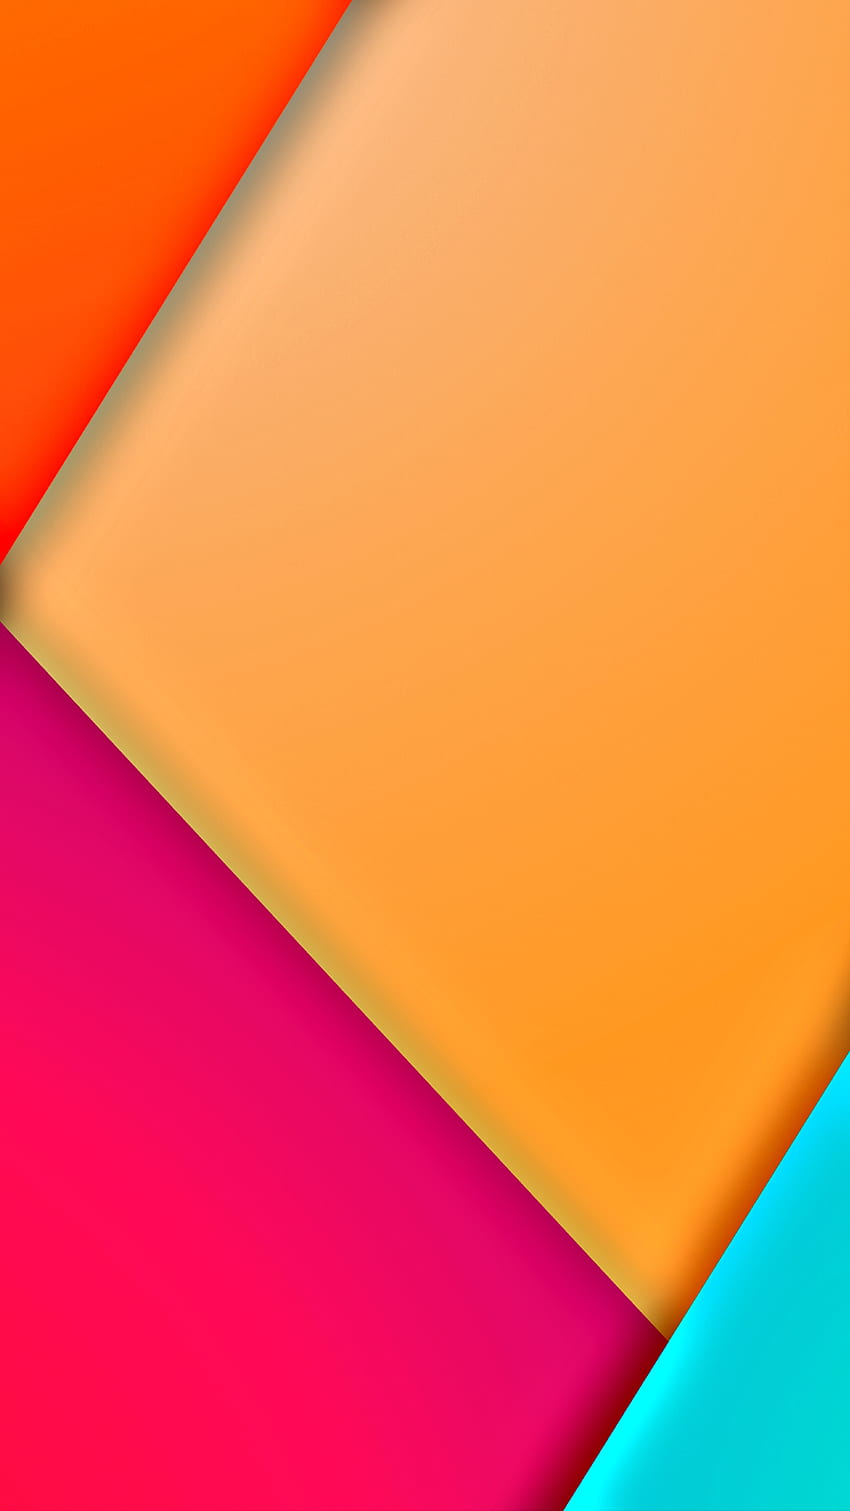 material design neon, digital, orange, red, modern, shapes, geometric, pattern, simple, abstract, colorful HD phone wallpaper